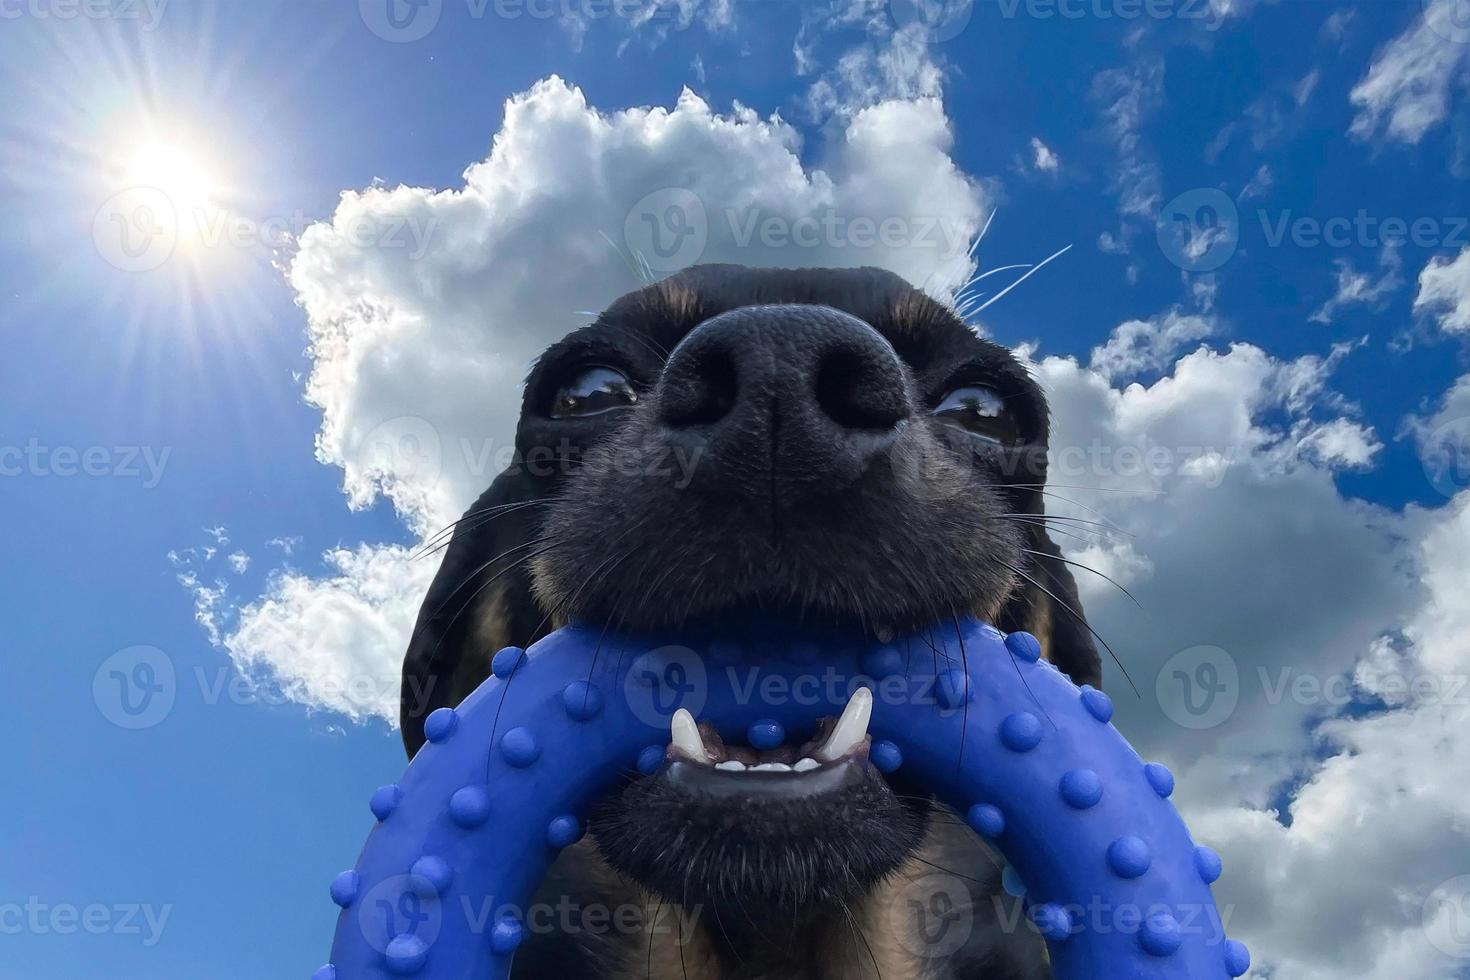 Black dog face with blue toy, funny, close-up on sky background photo